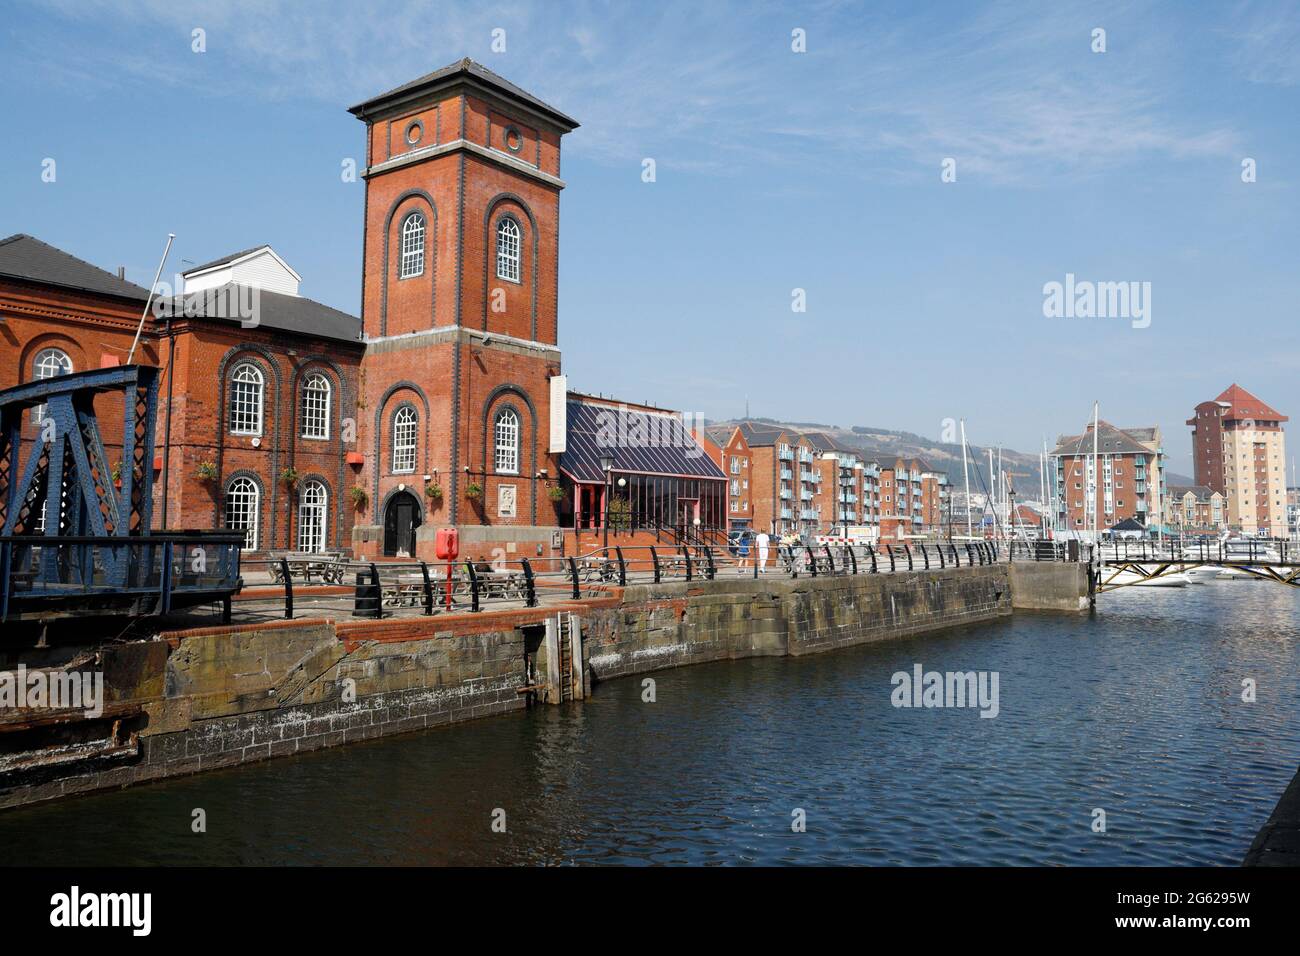 Swansea marina and the former Docks Pump House building converted to a bar, Wales UK Stock Photo